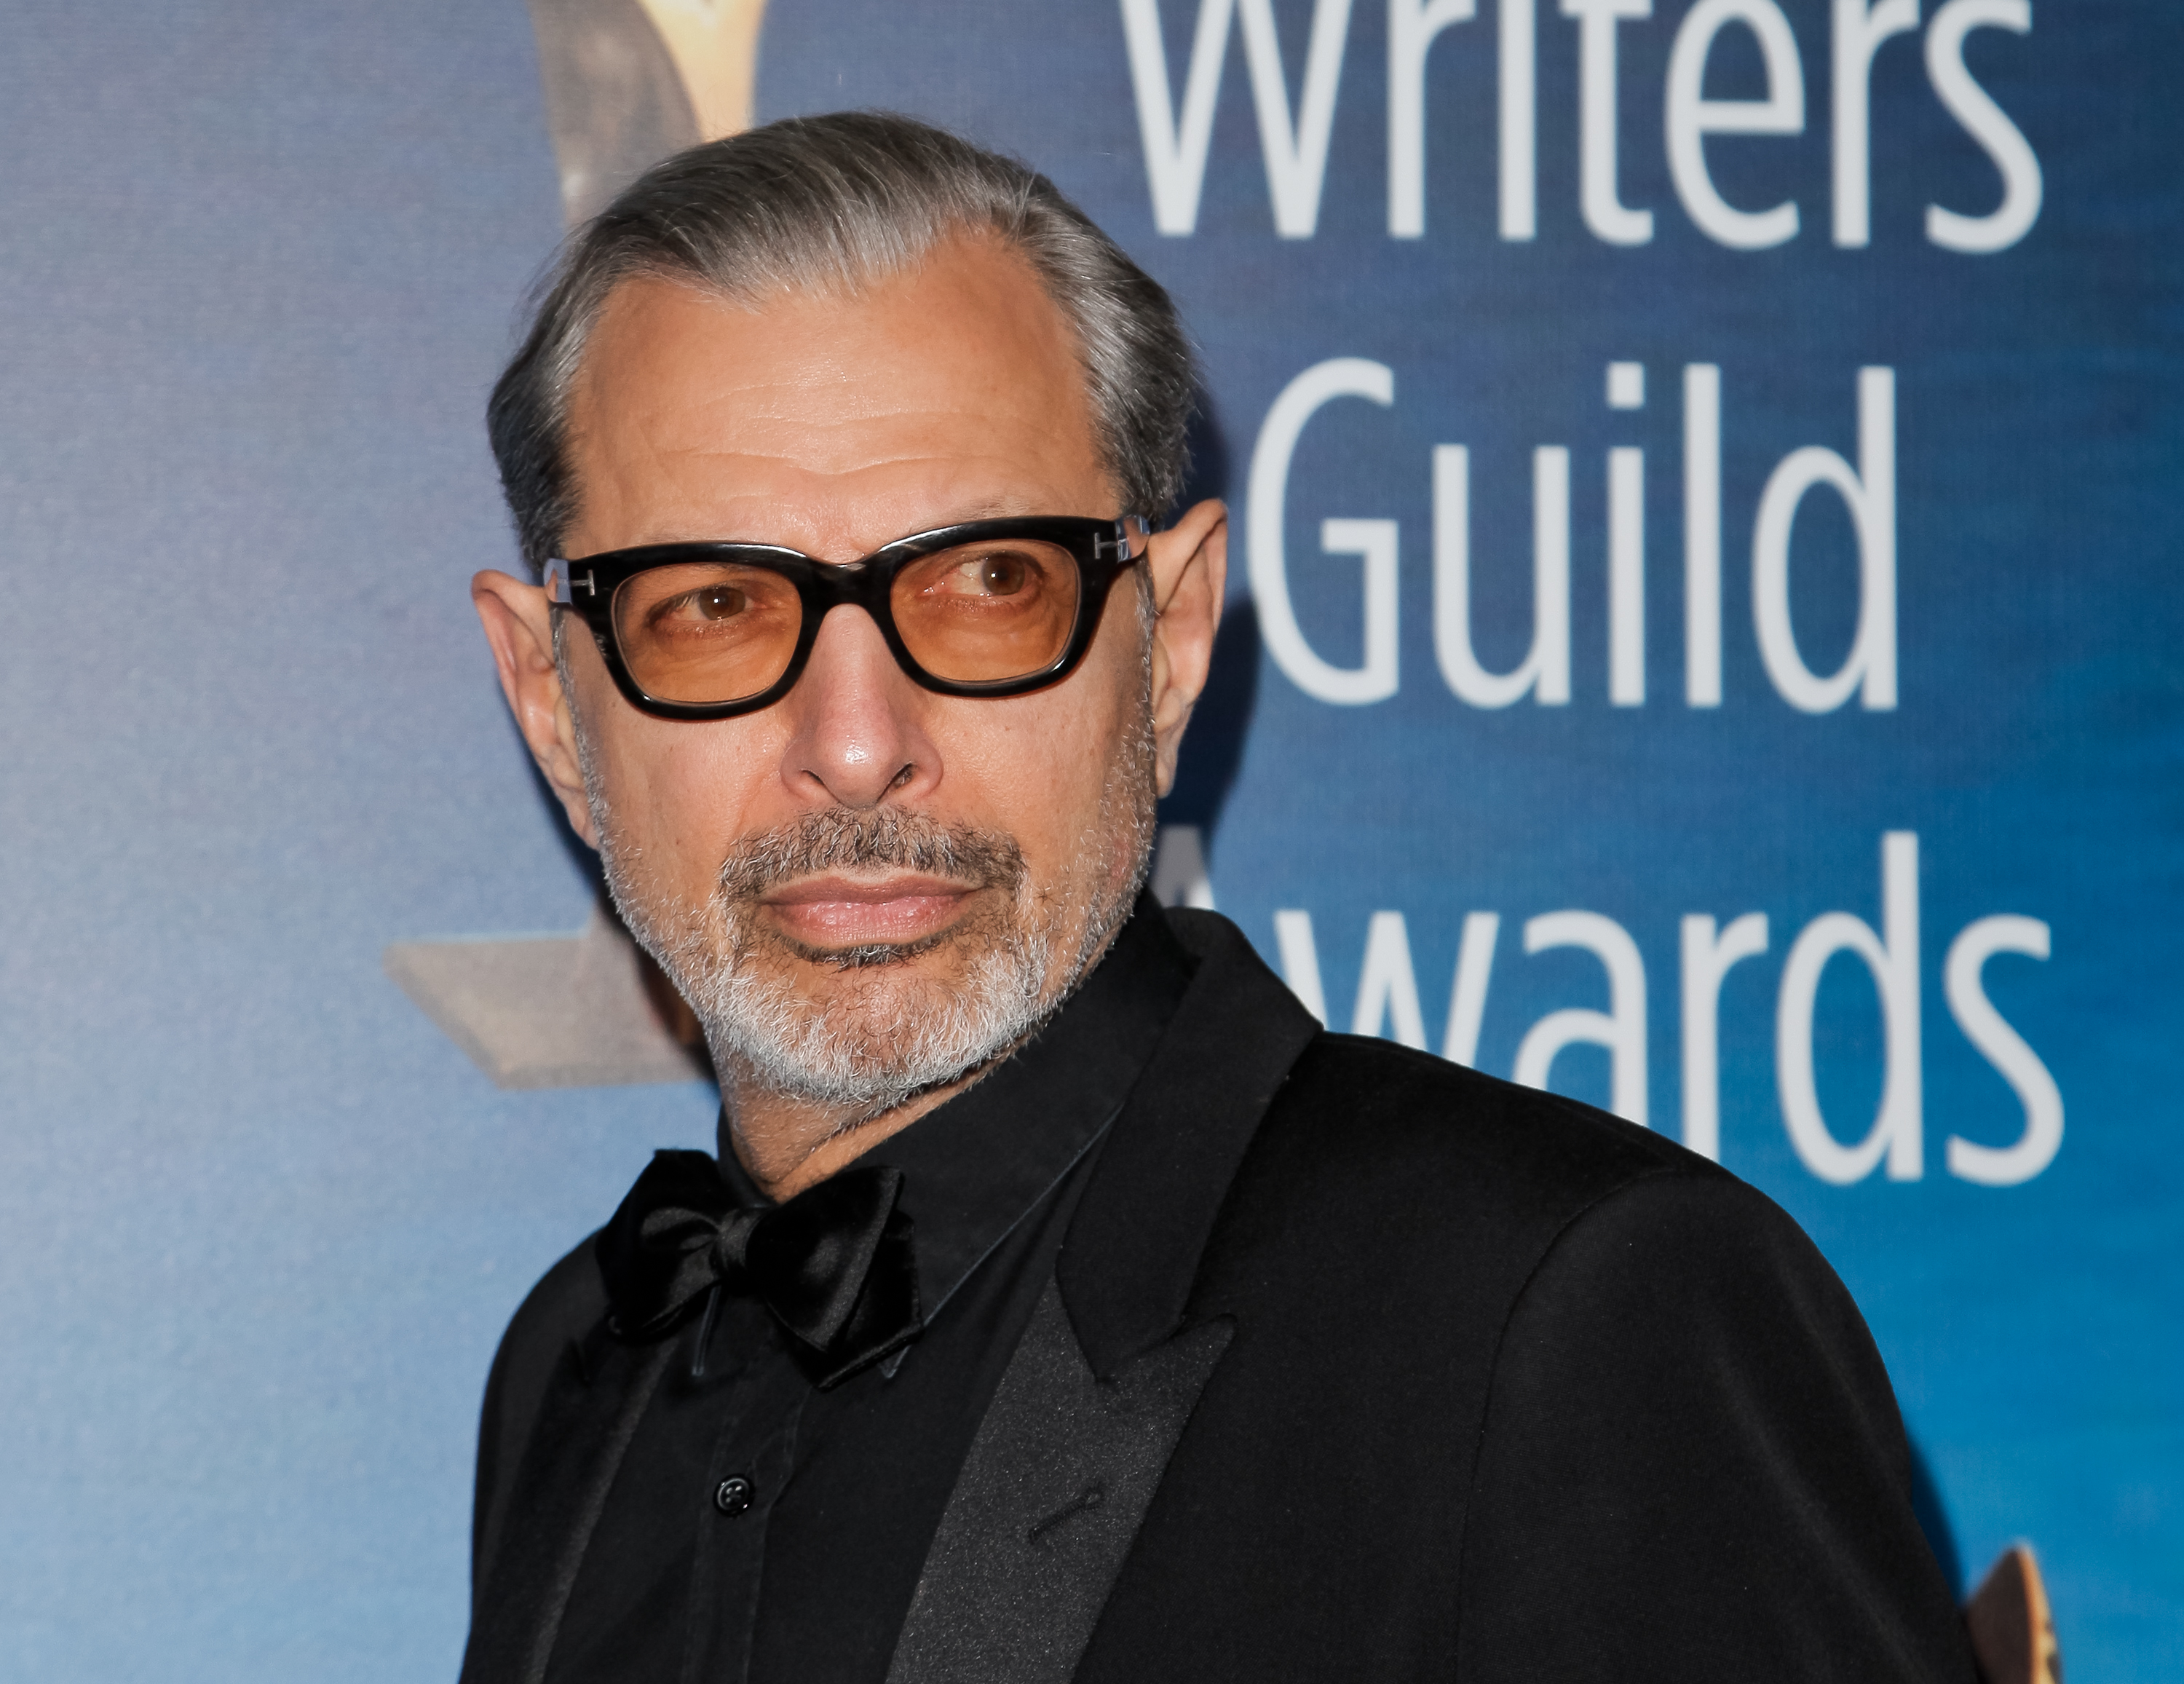 Jeff Goldblum attends the 2017 Writers Guild Awards L.A. Ceremony on Feb. 19, 2017 in Beverly Hills, California. (Tibrina Hobson—Getty Images)